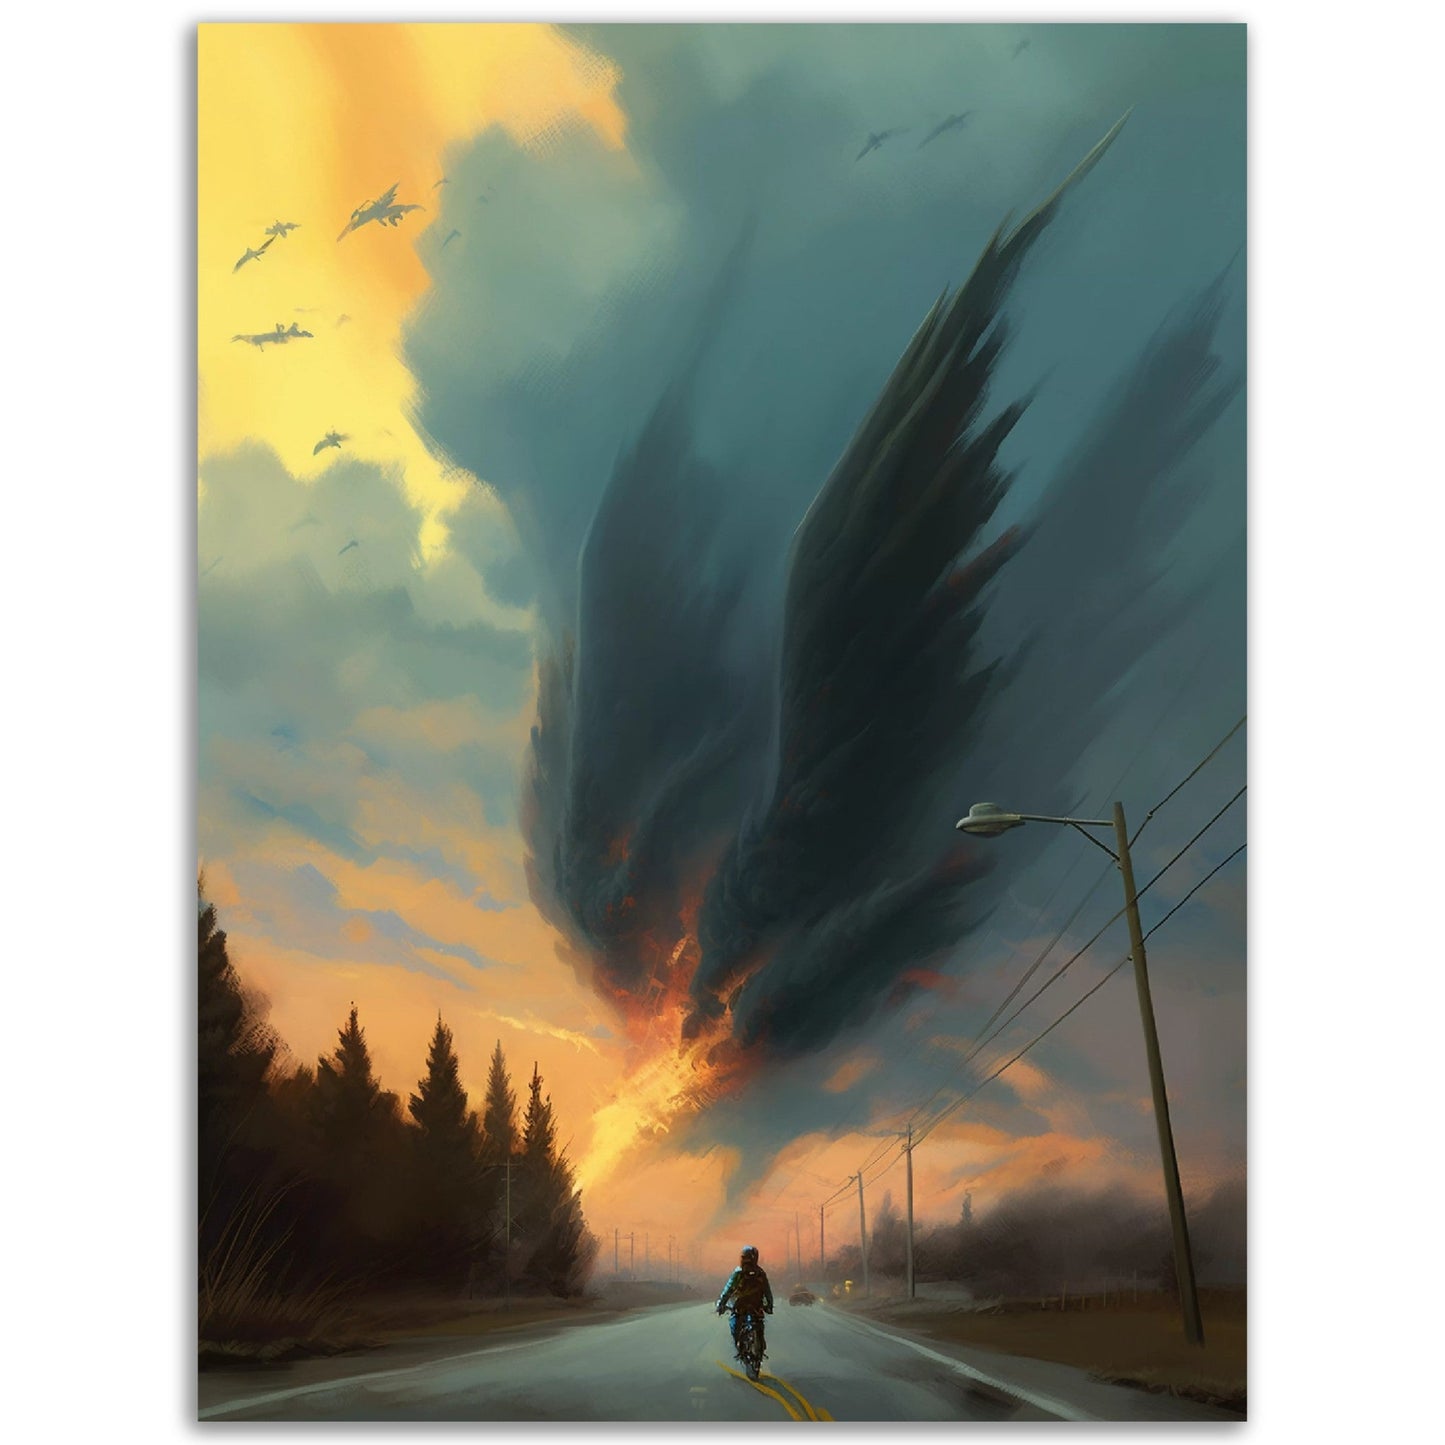 A mesmerizing "Angel Is Falling" poster capturing a man strolling along a scenic road, while an enchanting bird soars freely in the expansive sky.